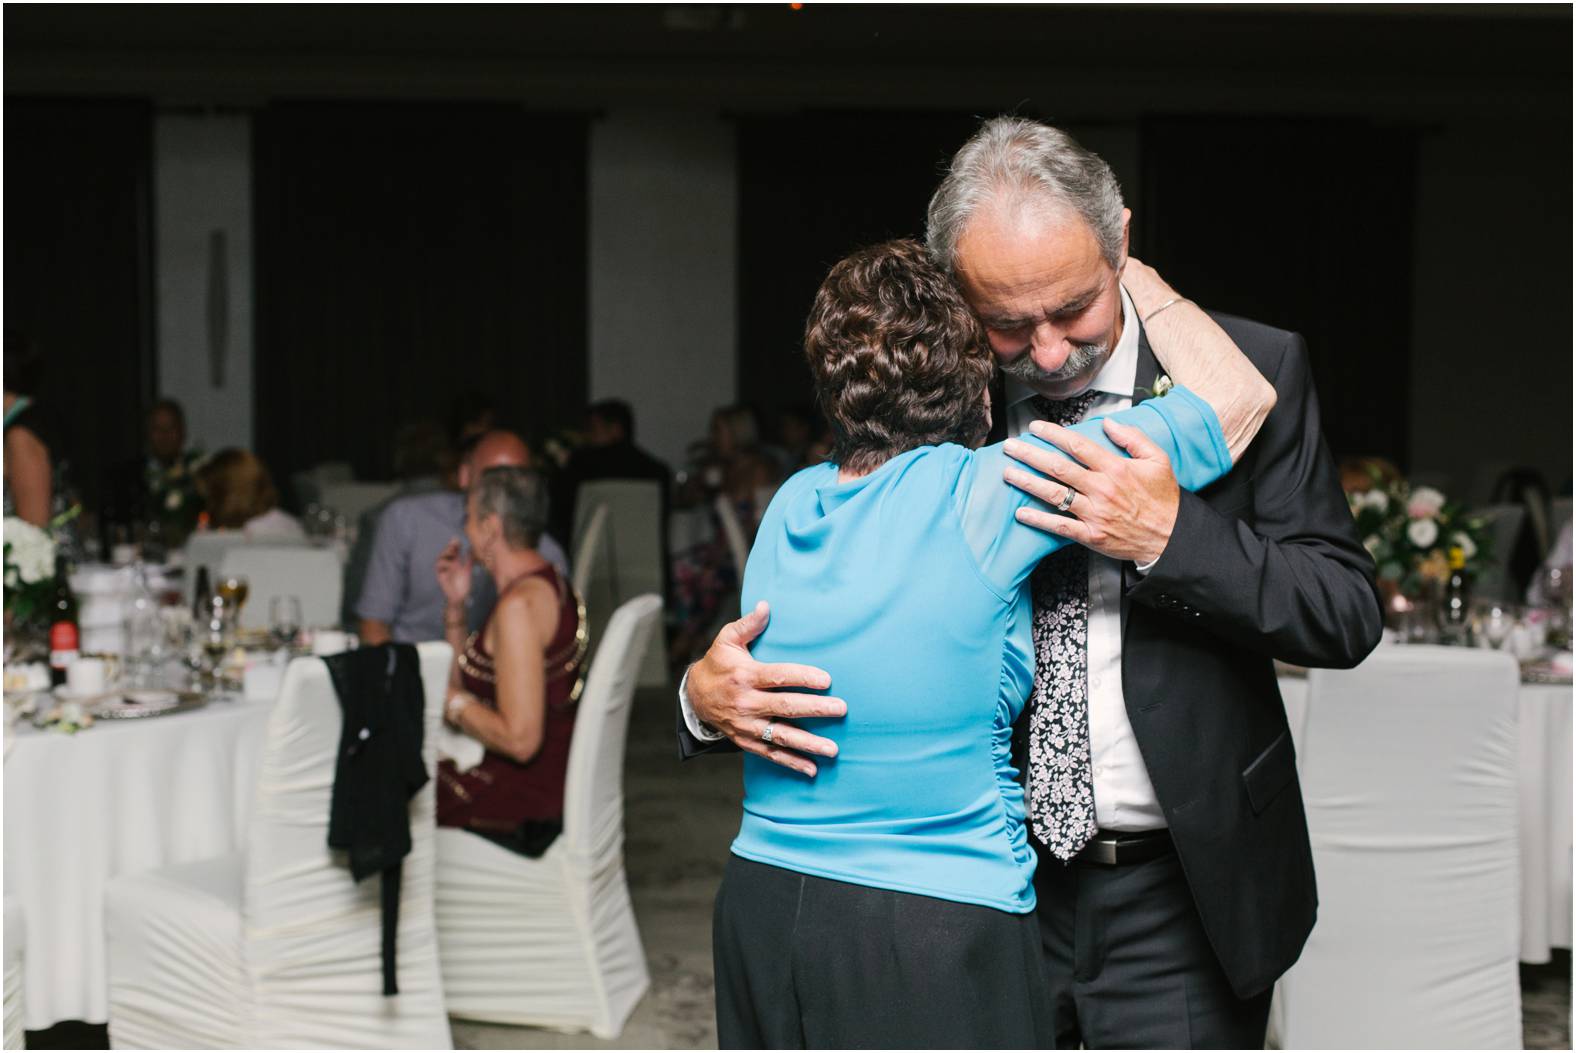 Father of the groom dances with grandmother in emotional moment at summer wedding reception